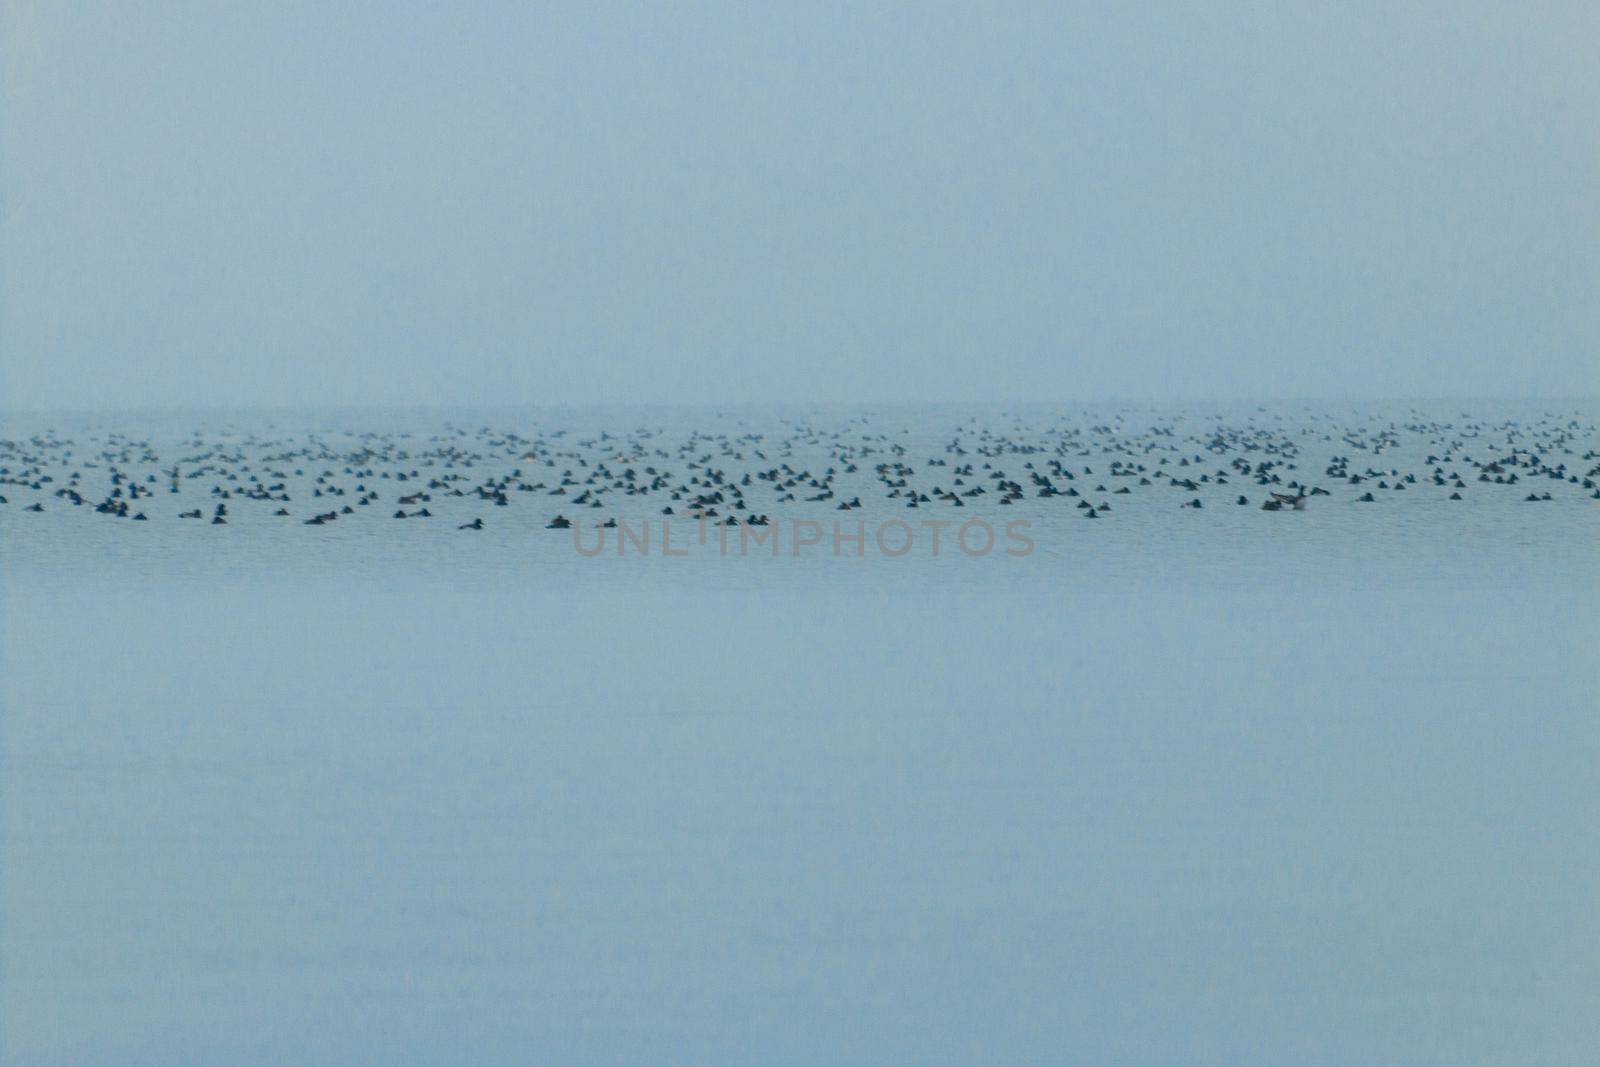 Tons of water birds out at shore in a beautiful misty photo . High quality photo